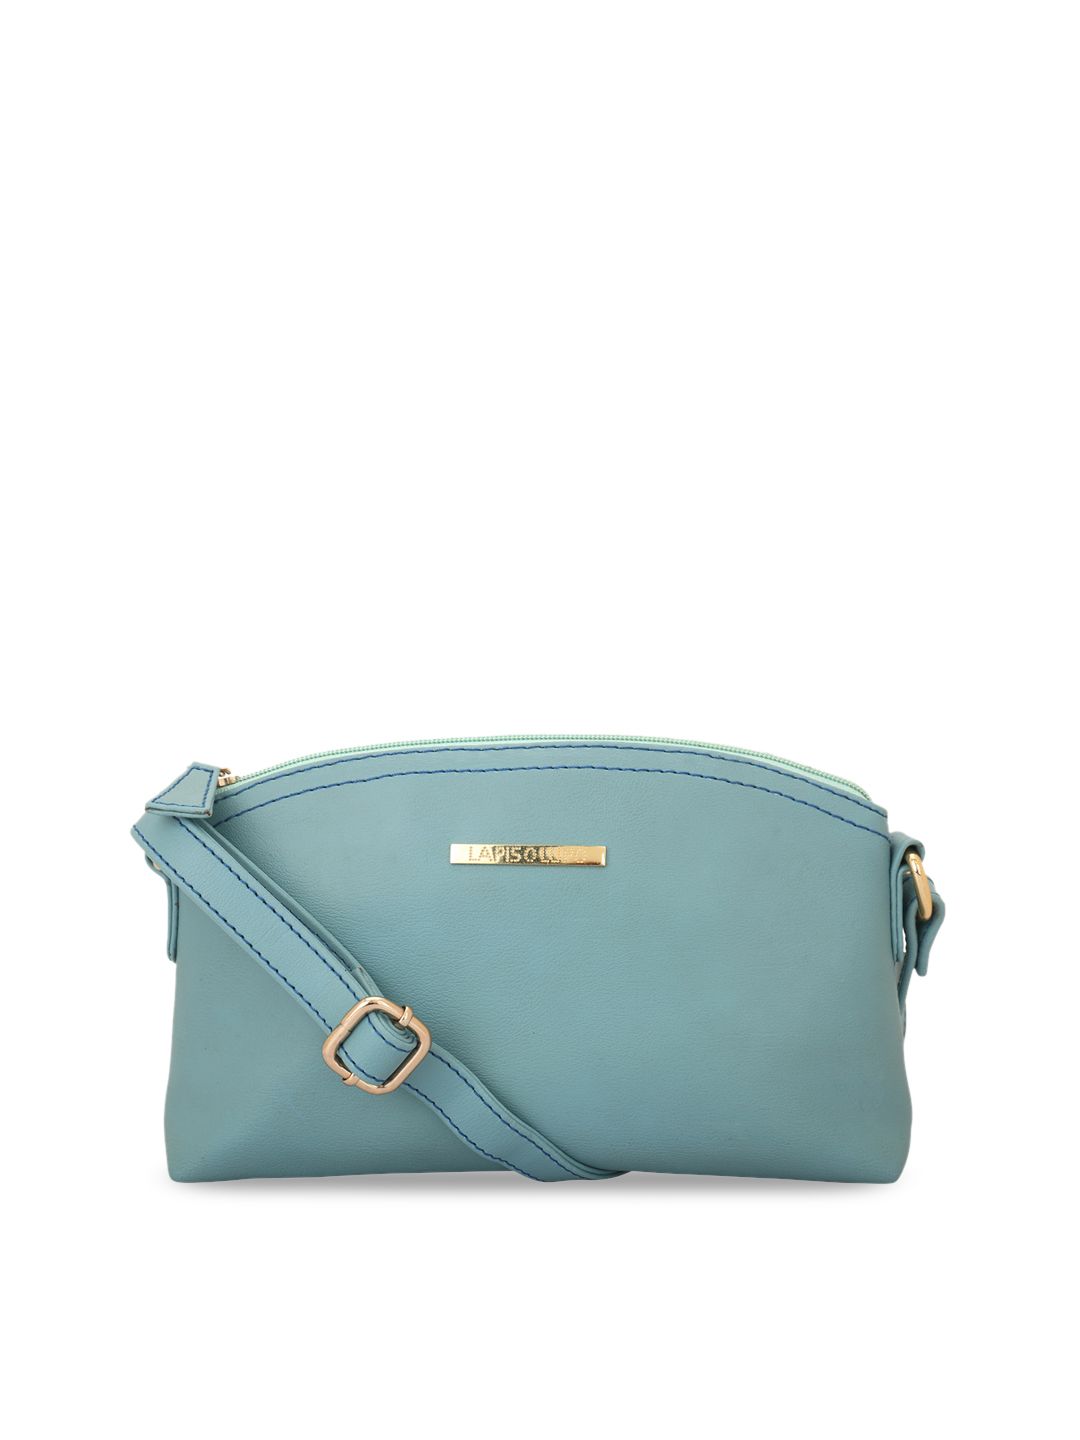 Lapis O Lupo Turquoise Blue Solid Sling Bag Price in India